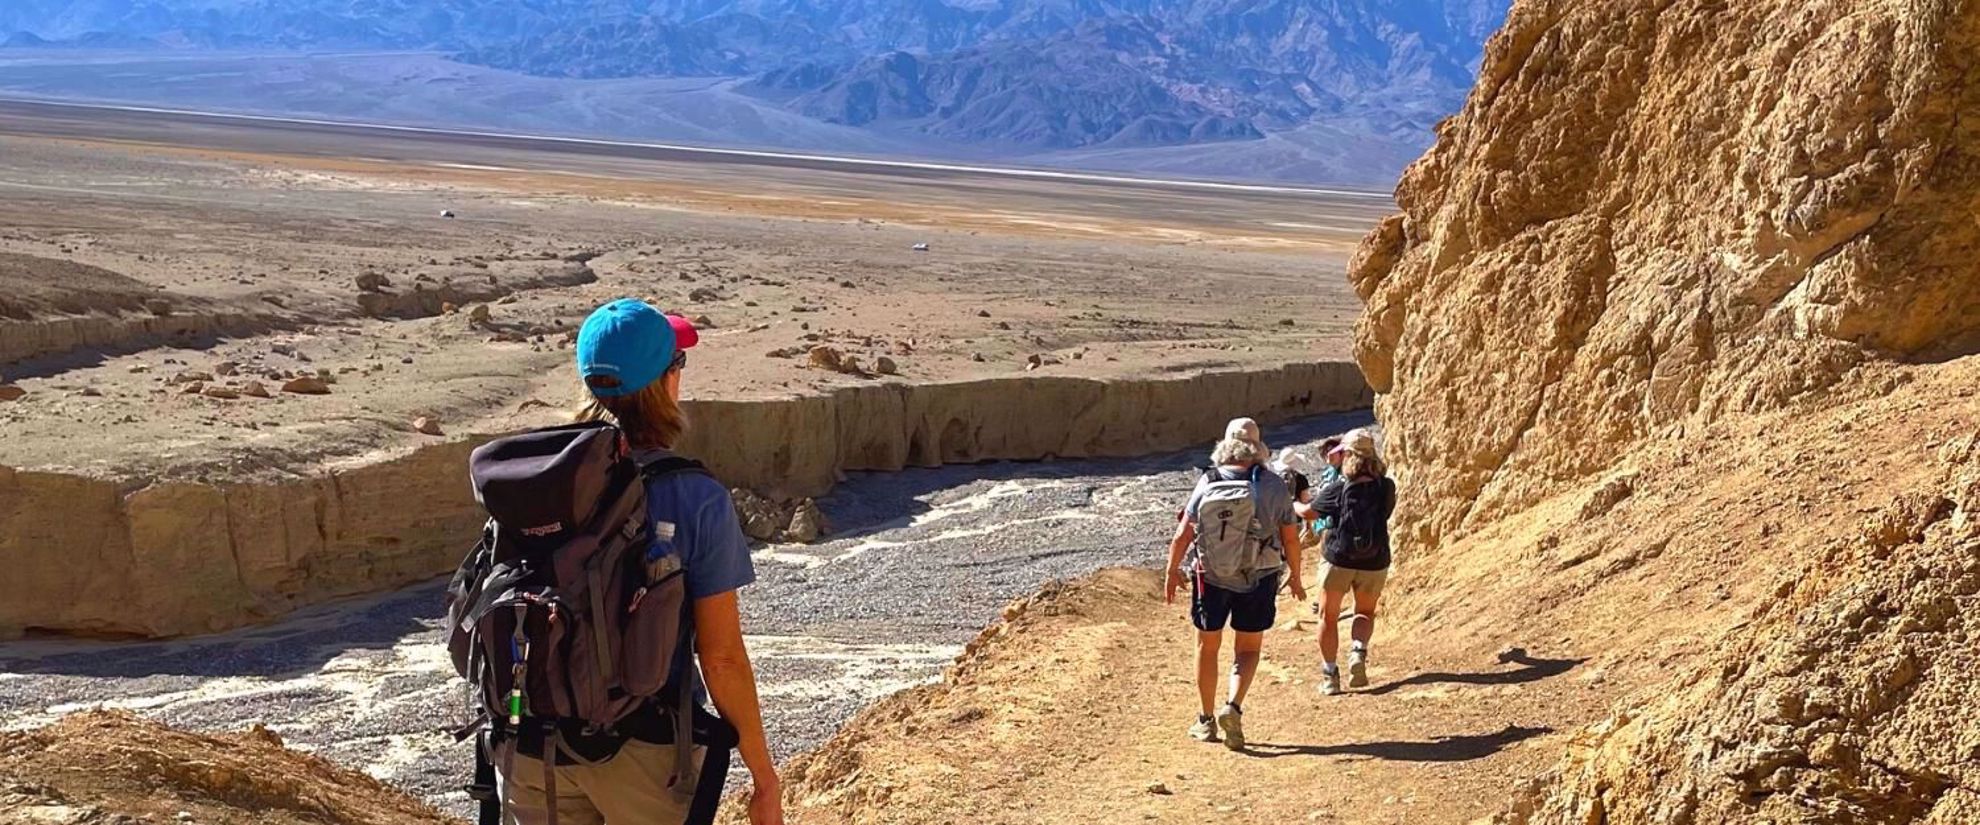 women's hiking trip in Death Valley National Park